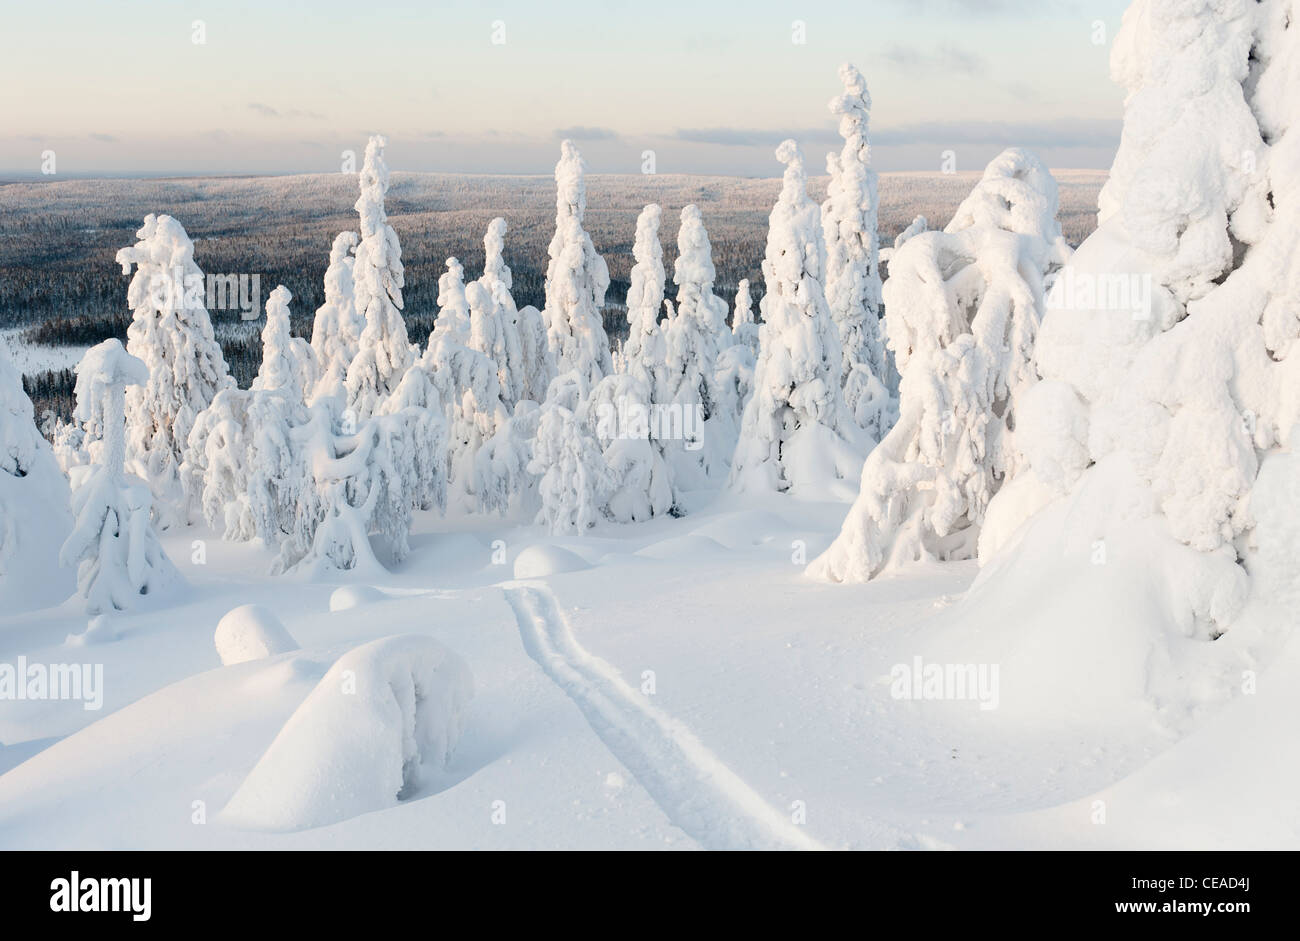 Snow-clad views of Iso-Syöte, Finland Stock Photo